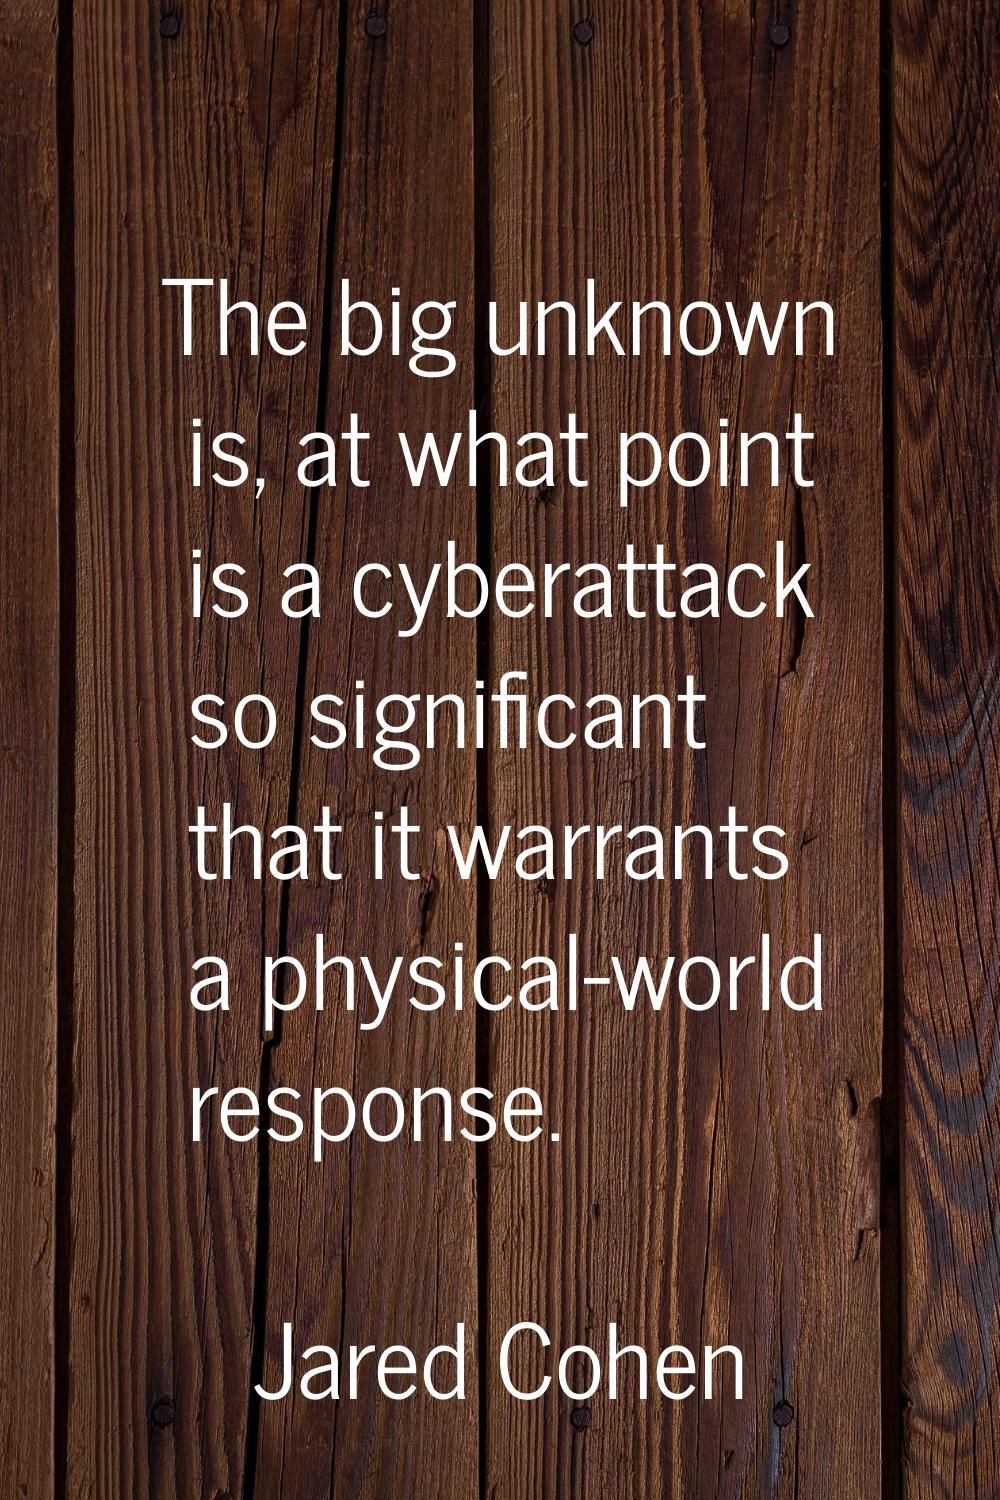 The big unknown is, at what point is a cyberattack so significant that it warrants a physical-world